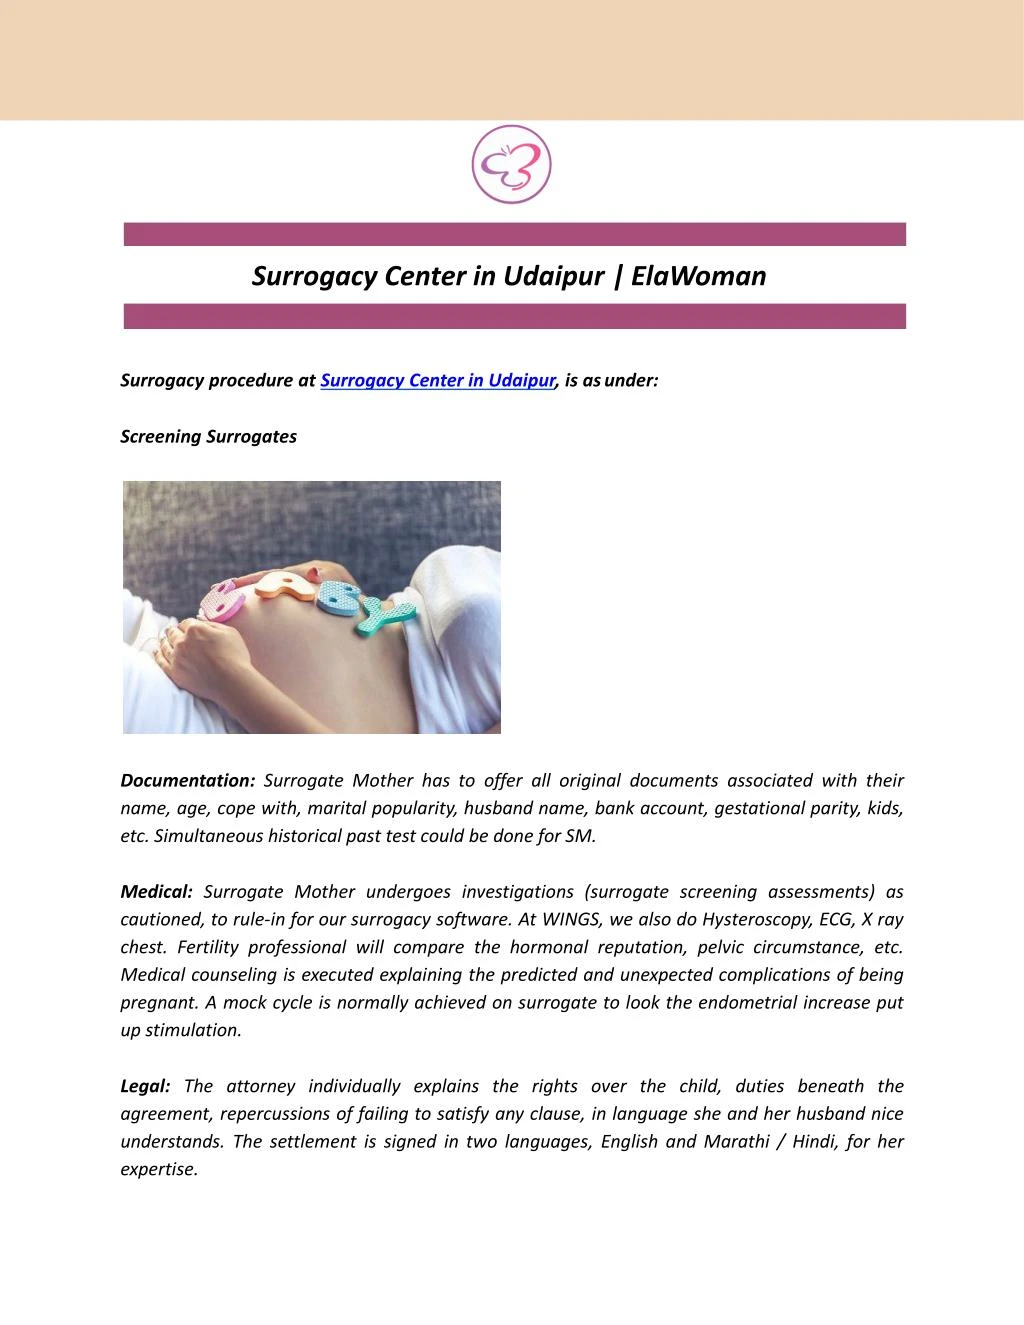 surrogacy center in udaipur elawoman